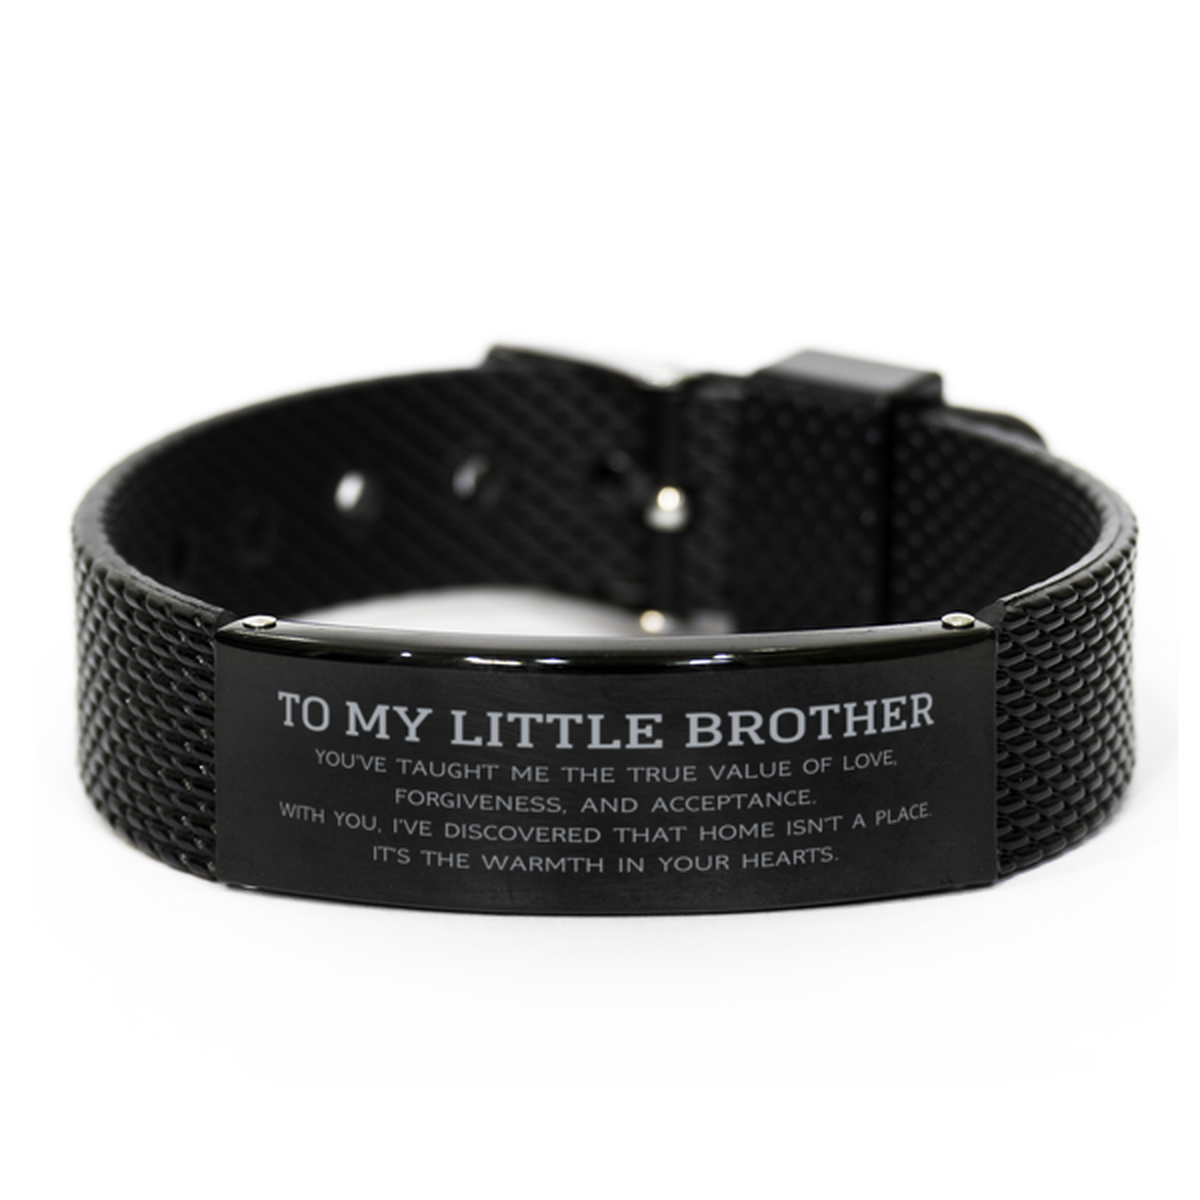 To My Little Brother Gifts, You've taught me the true value of love, Thank You Gifts For Little Brother, Birthday Black Shark Mesh Bracelet For Little Brother